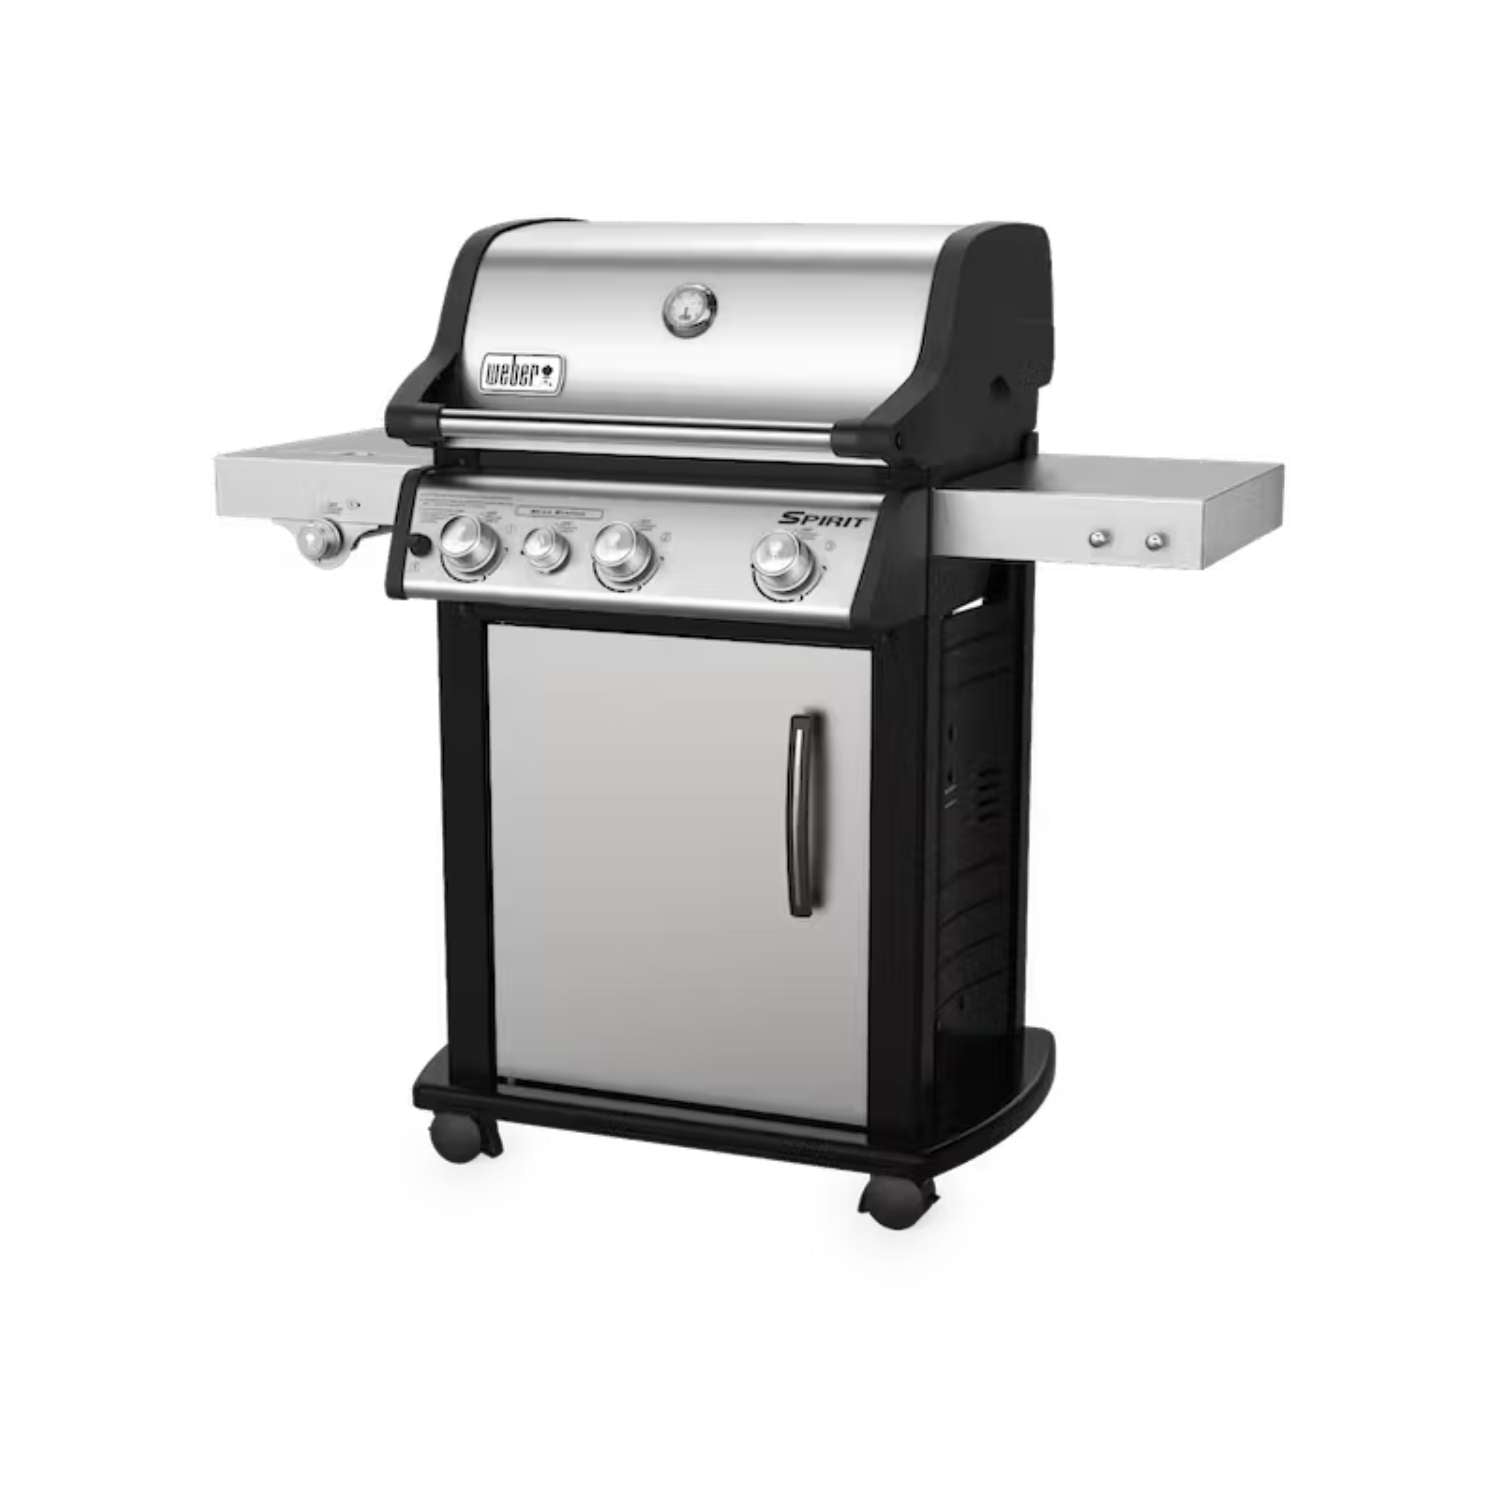 Weber Spirit SP-335 Grill perfect for outdoor barbecues available at MeatKing.hk2